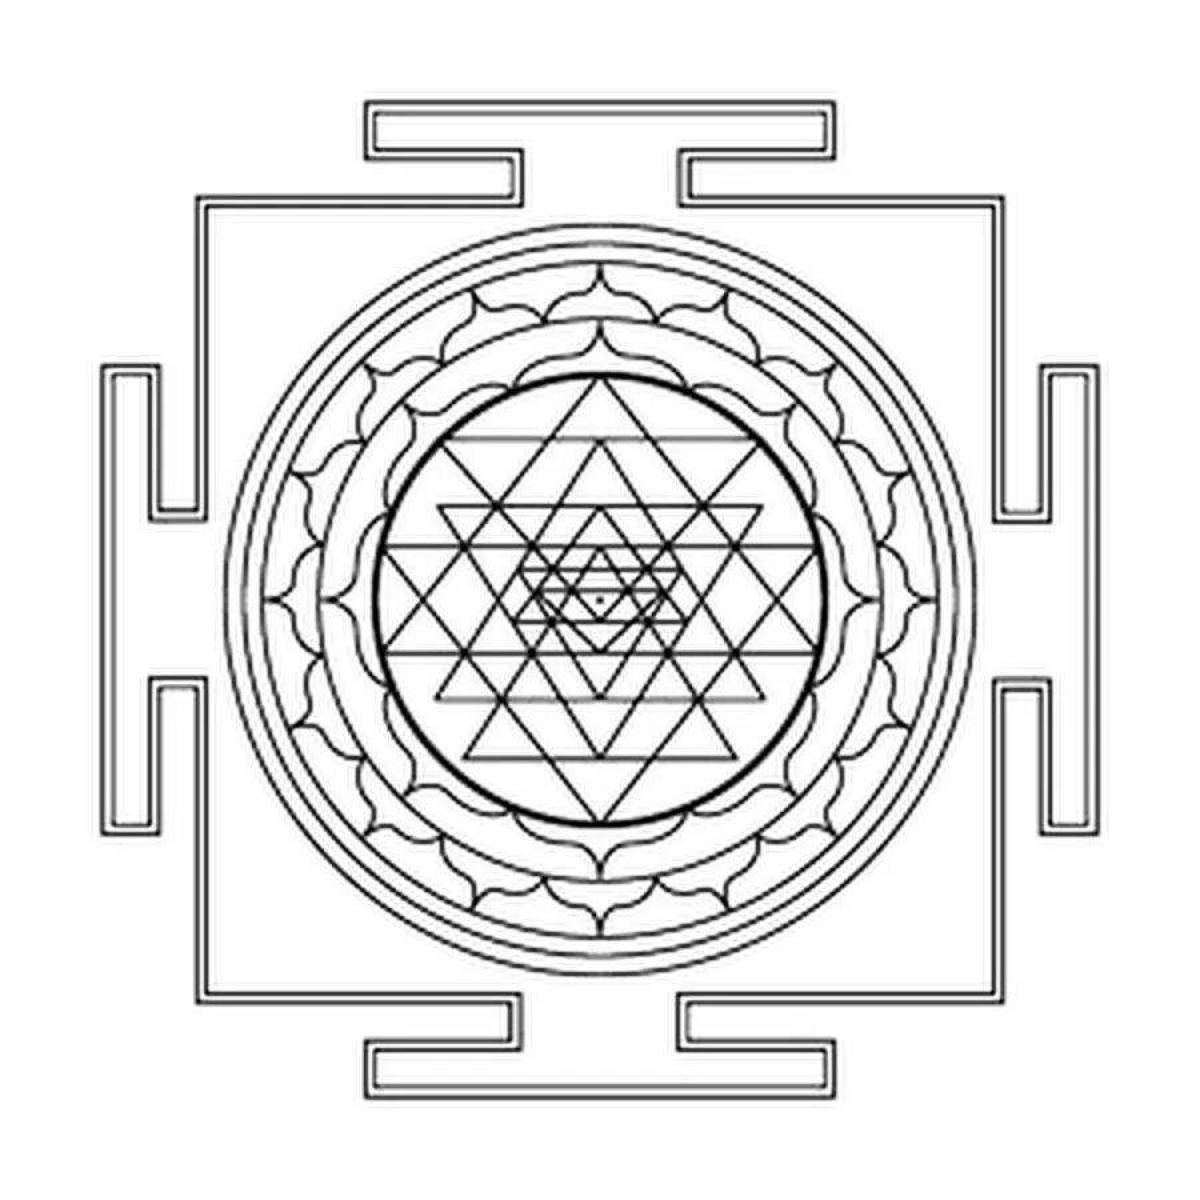 Charming yantra coloring book